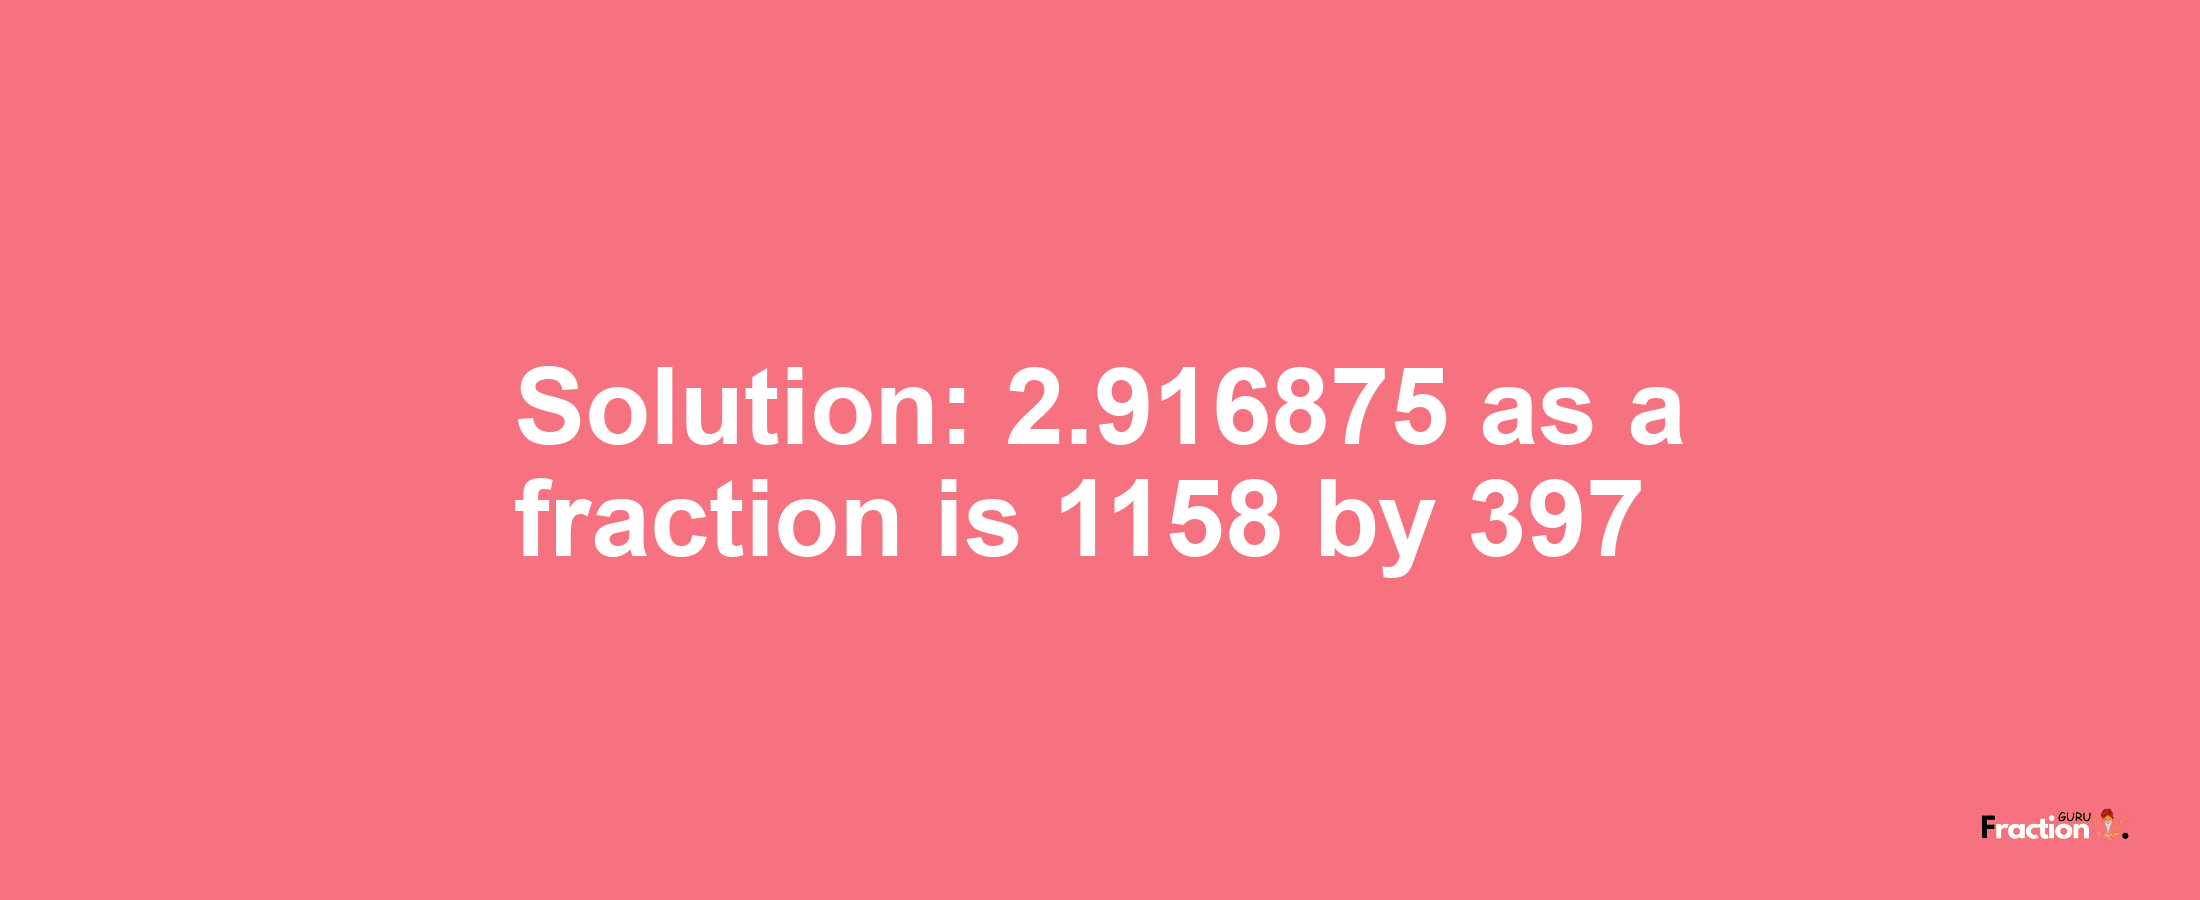 Solution:2.916875 as a fraction is 1158/397